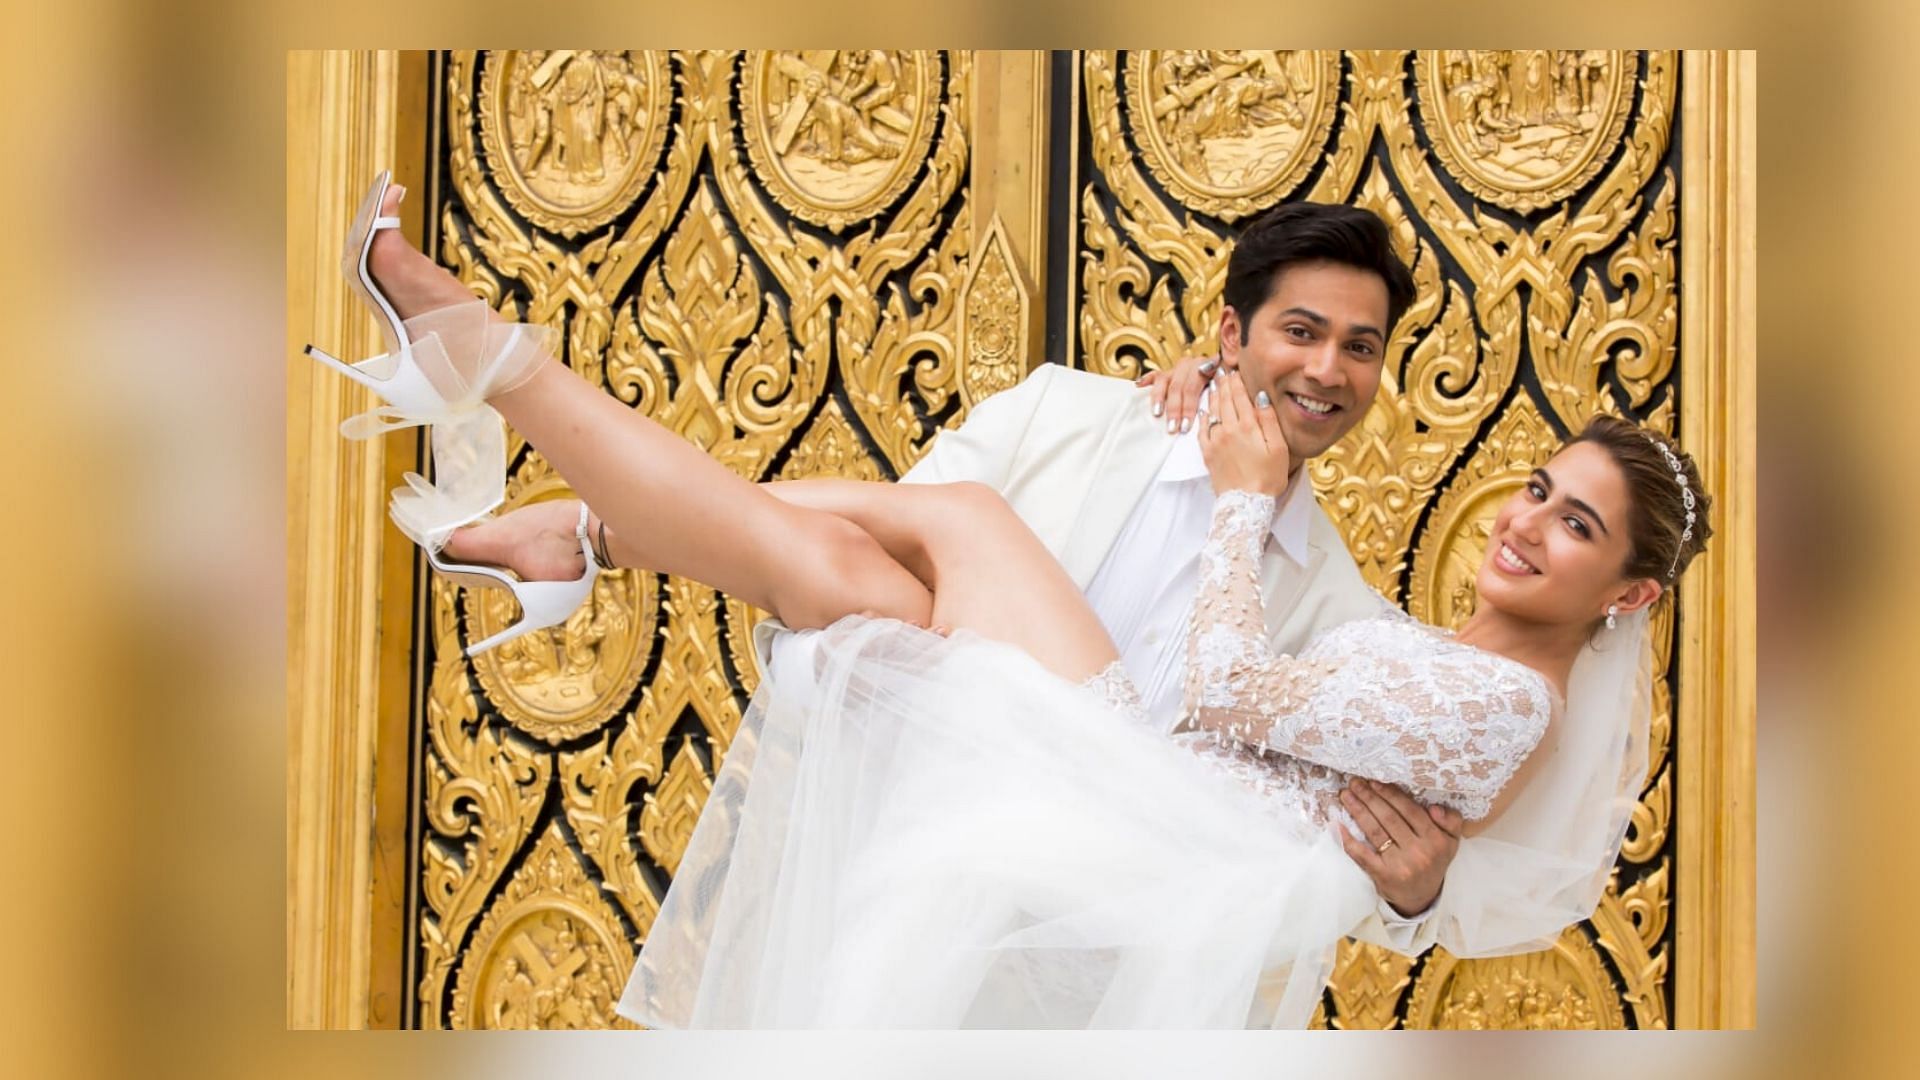 Varun Dhawan and Sara Ali Khan in a new poster from <i>Coolie No. 1</i> remake.